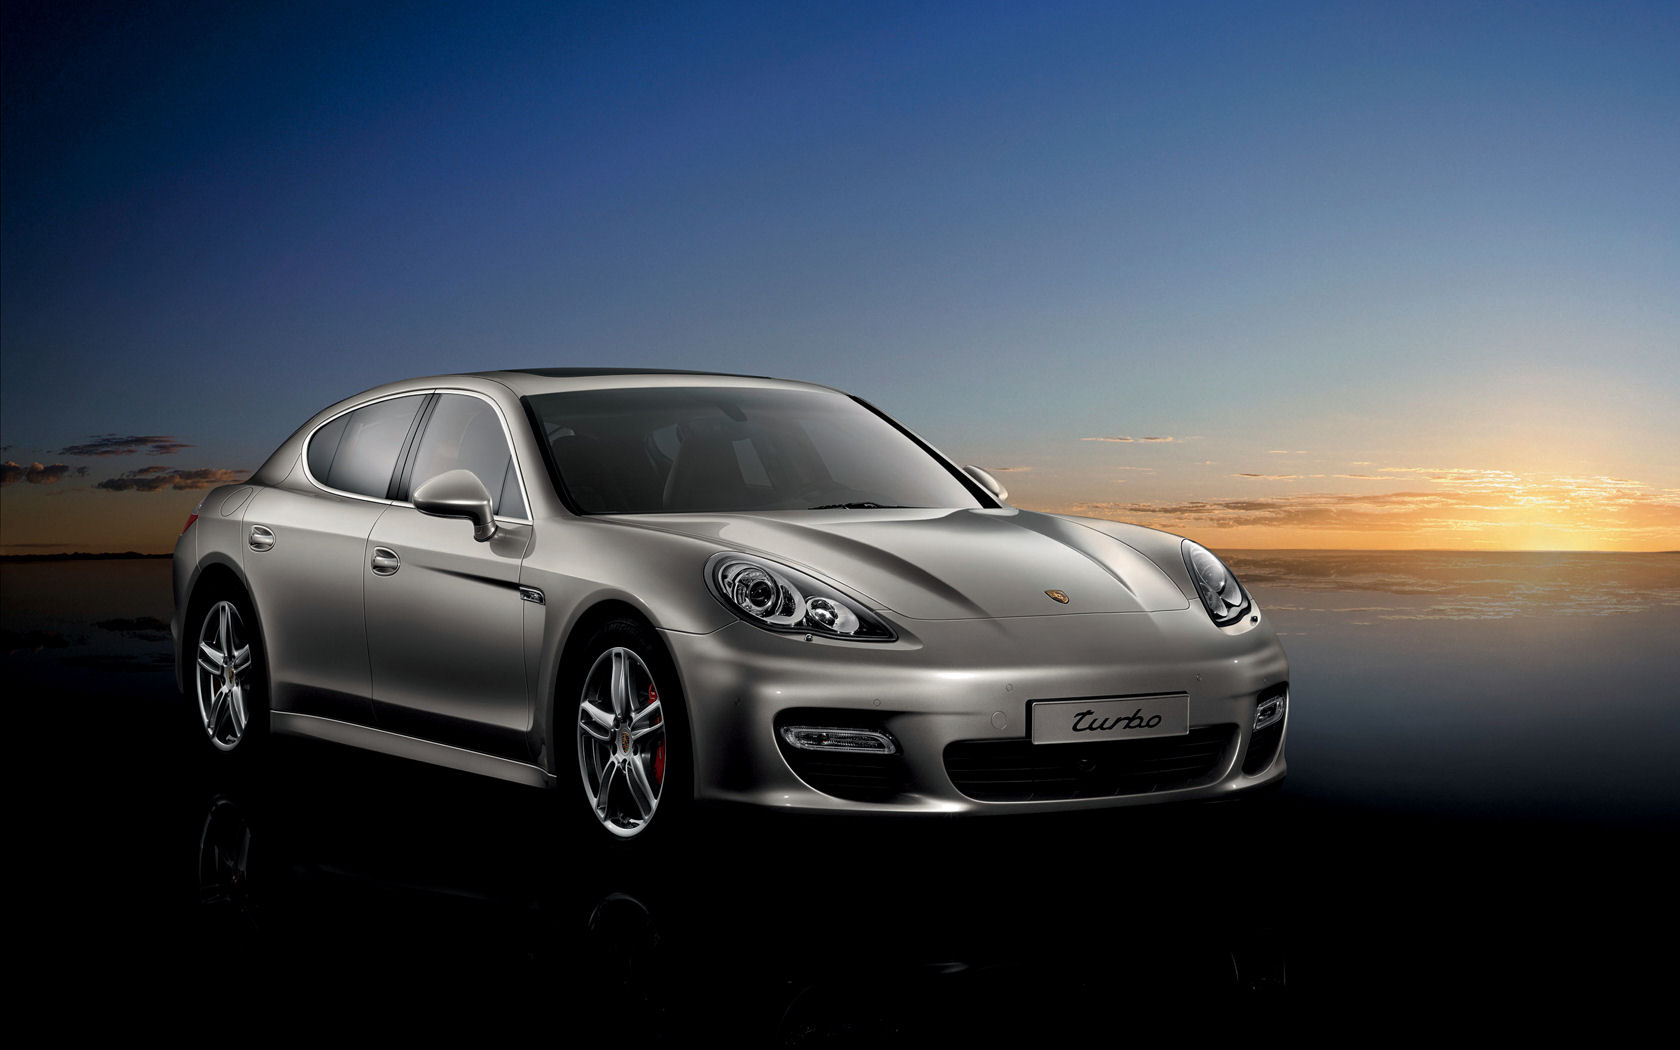 Porsche Porsche Panamera Porsche Panamera Desktop Wallpapers 1680x1050